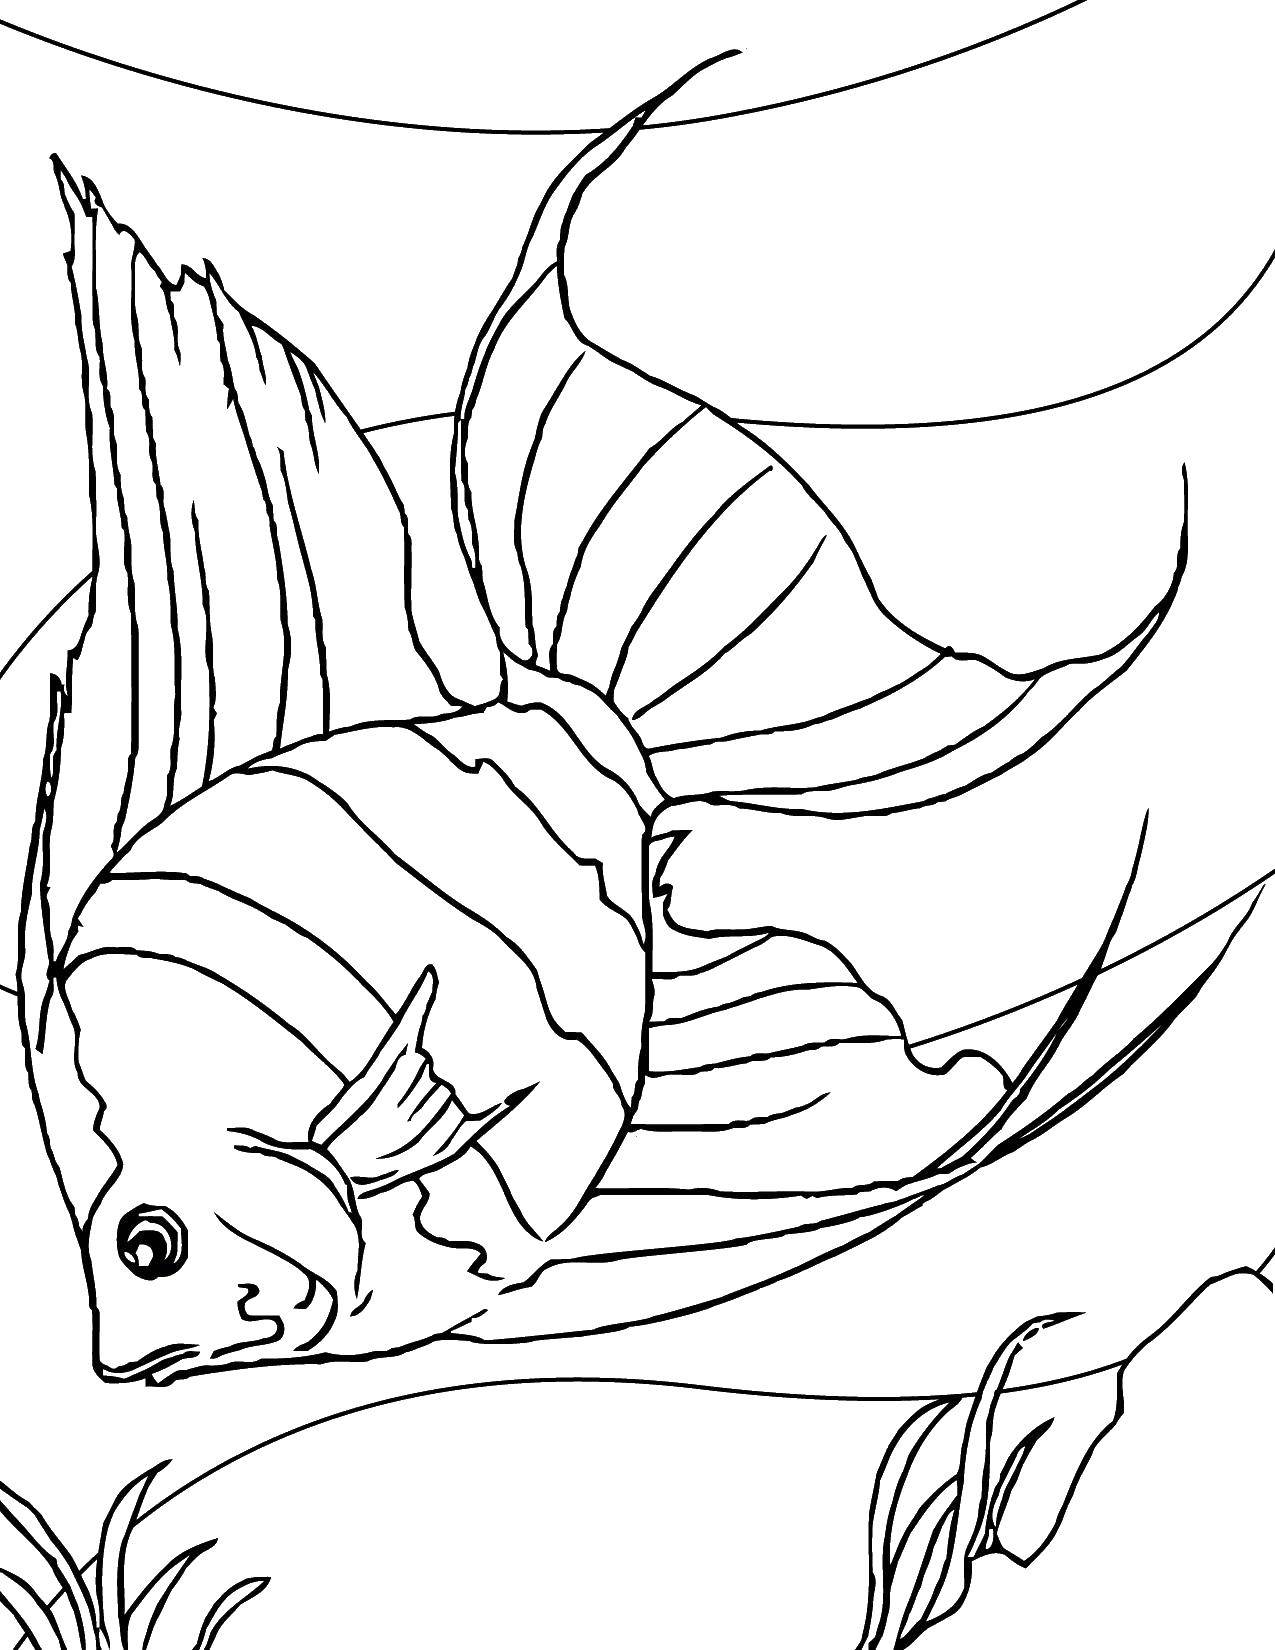 Coloring Fish with large fins. Category fish. Tags:  fish, fin, tail.